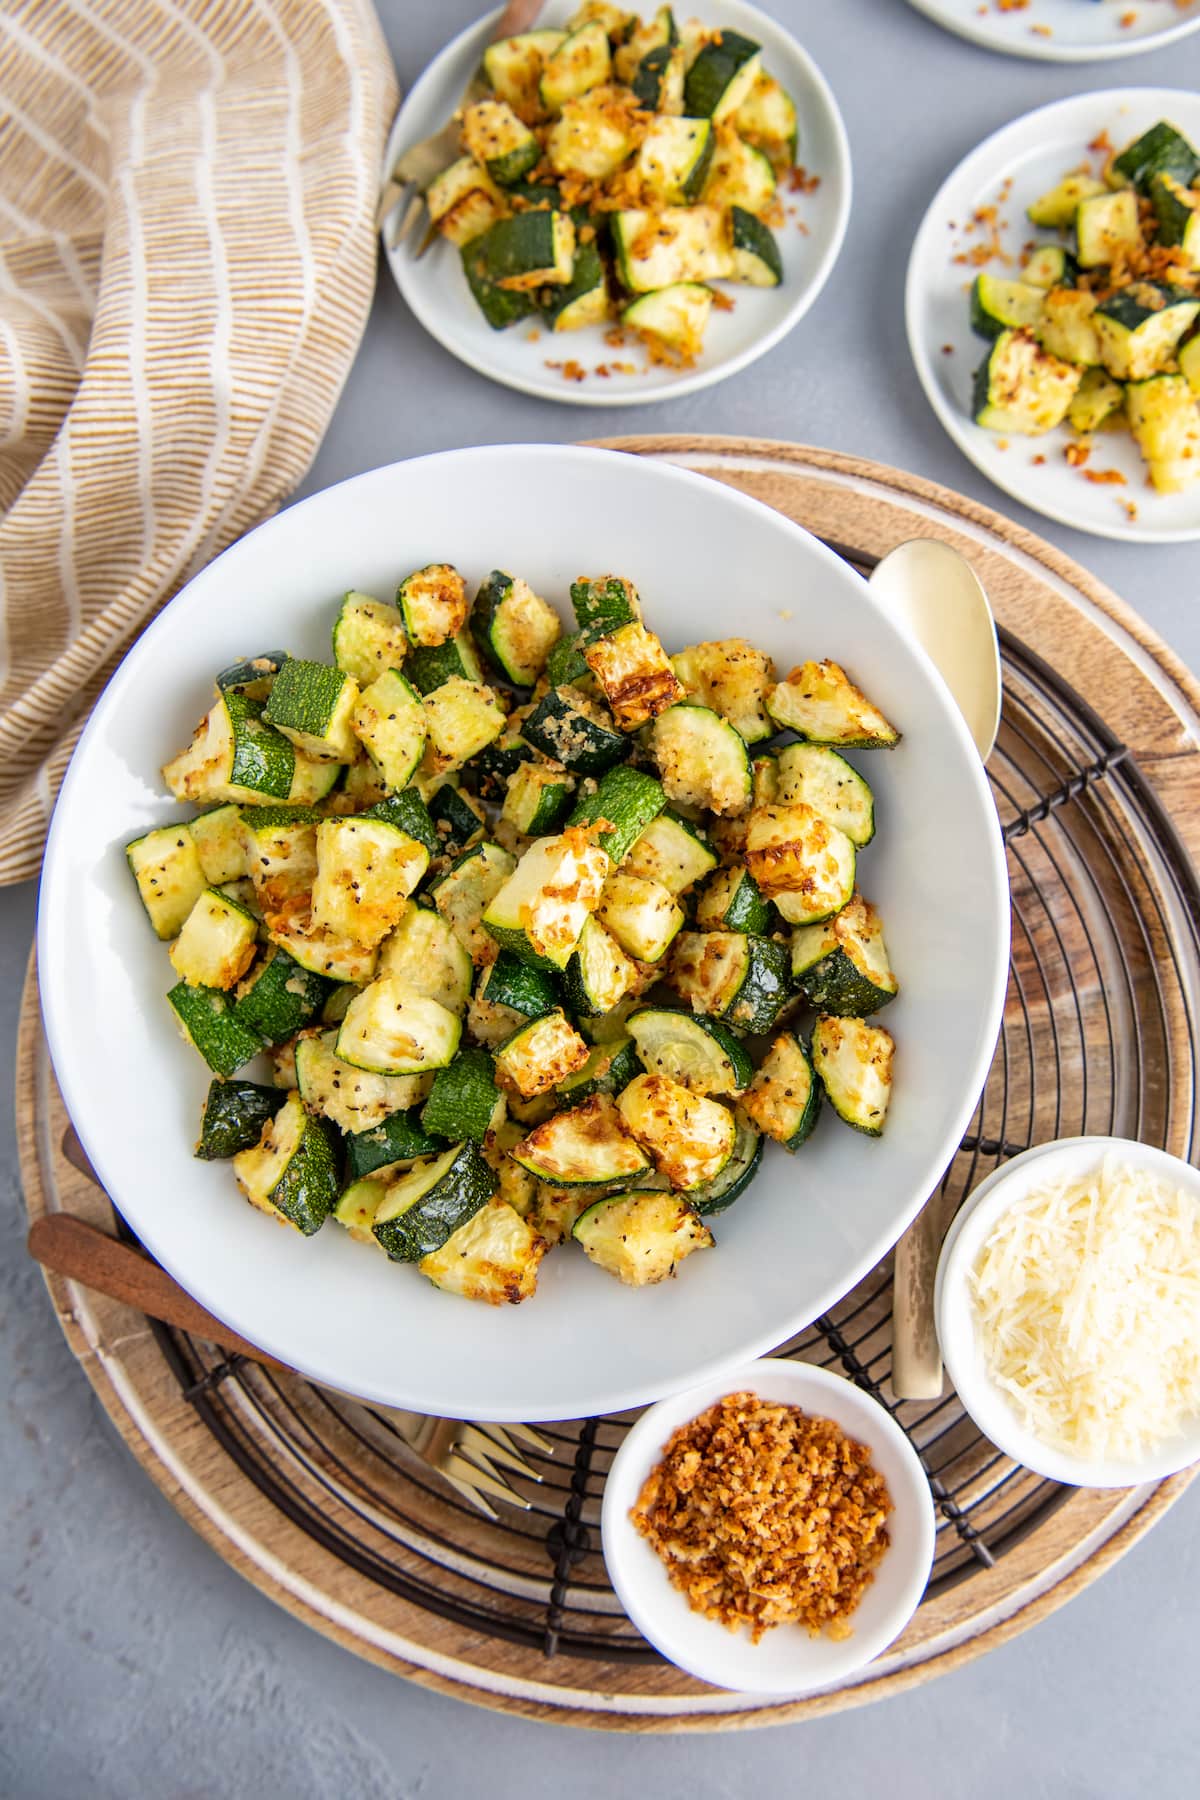 A large bowl of air fryer zucchini with two plates of zucchini and small bowls filled with parmesan cheese and crispy bread crumbs.